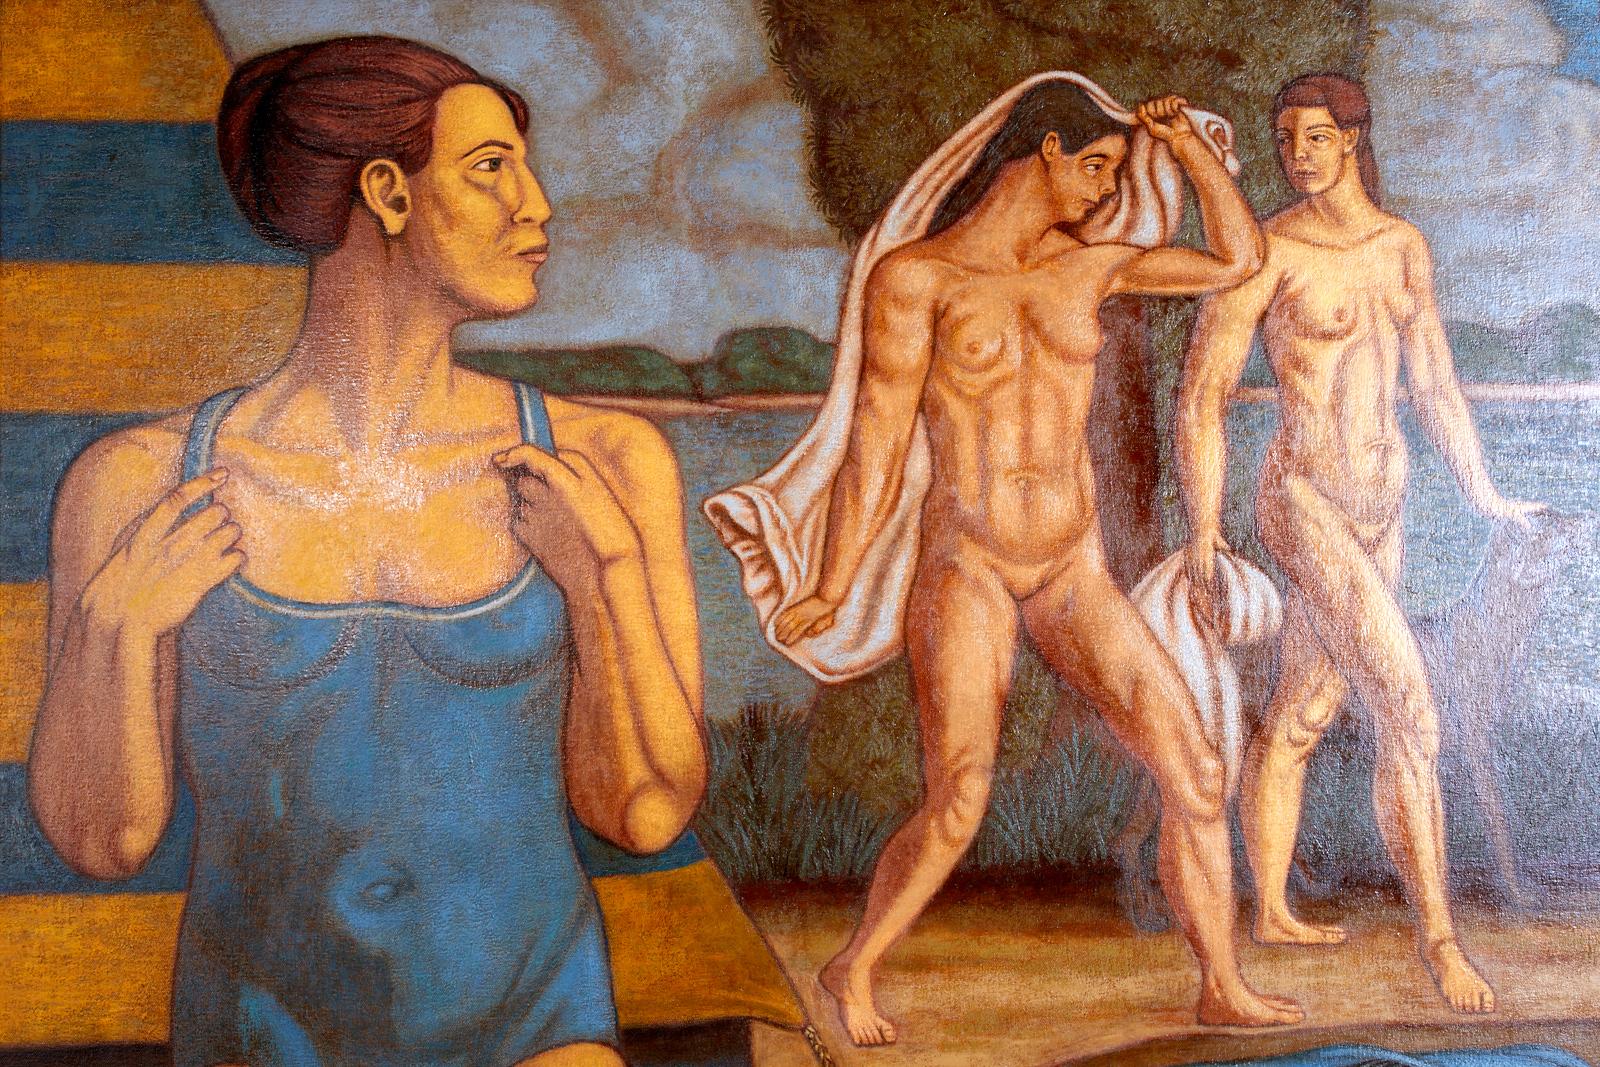 Bather's with Fish Oil on Canvas - Gray Figurative Painting by Norbert Schlaus